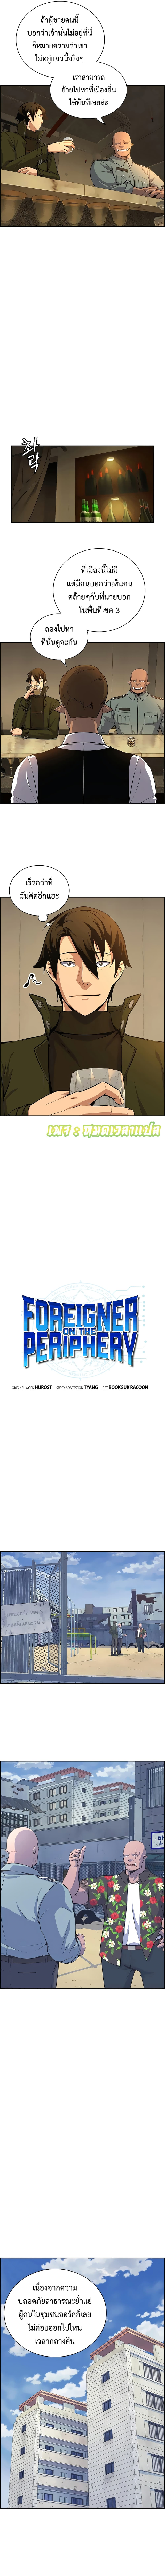 Foreigner on the Periphery 5-5